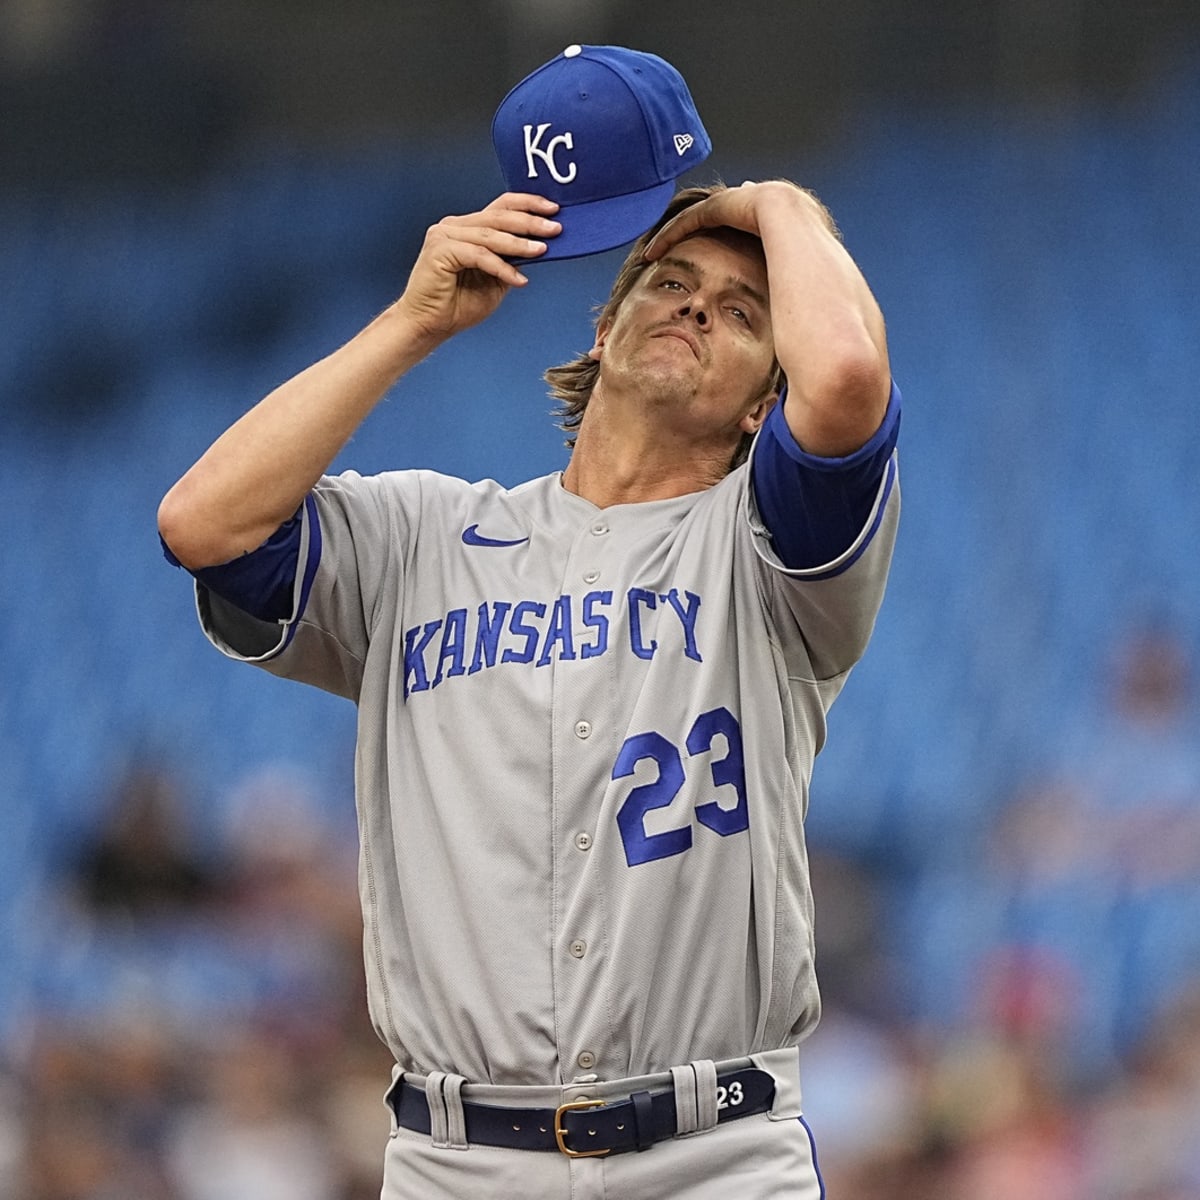 Kansas City Royals - Our homestand continues with Zack Greinke on the mound  to open the series vs. the Angels. #TogetherRoyal